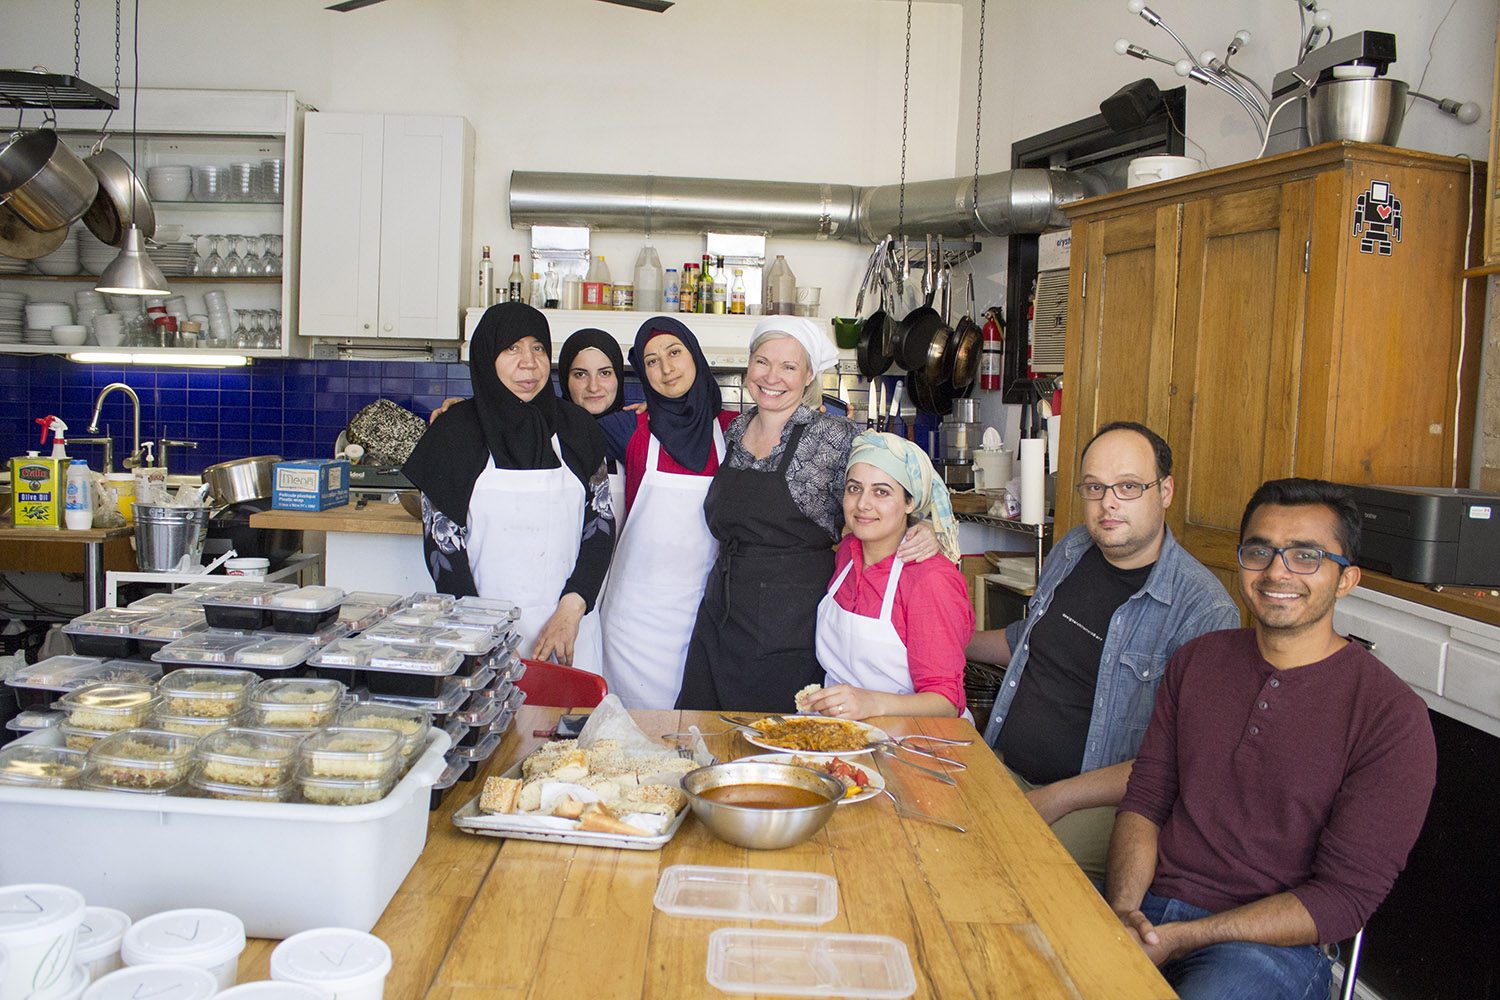 Syrian migrants running The Newcomer Kitchen - making authentic levantine dishes to make a living